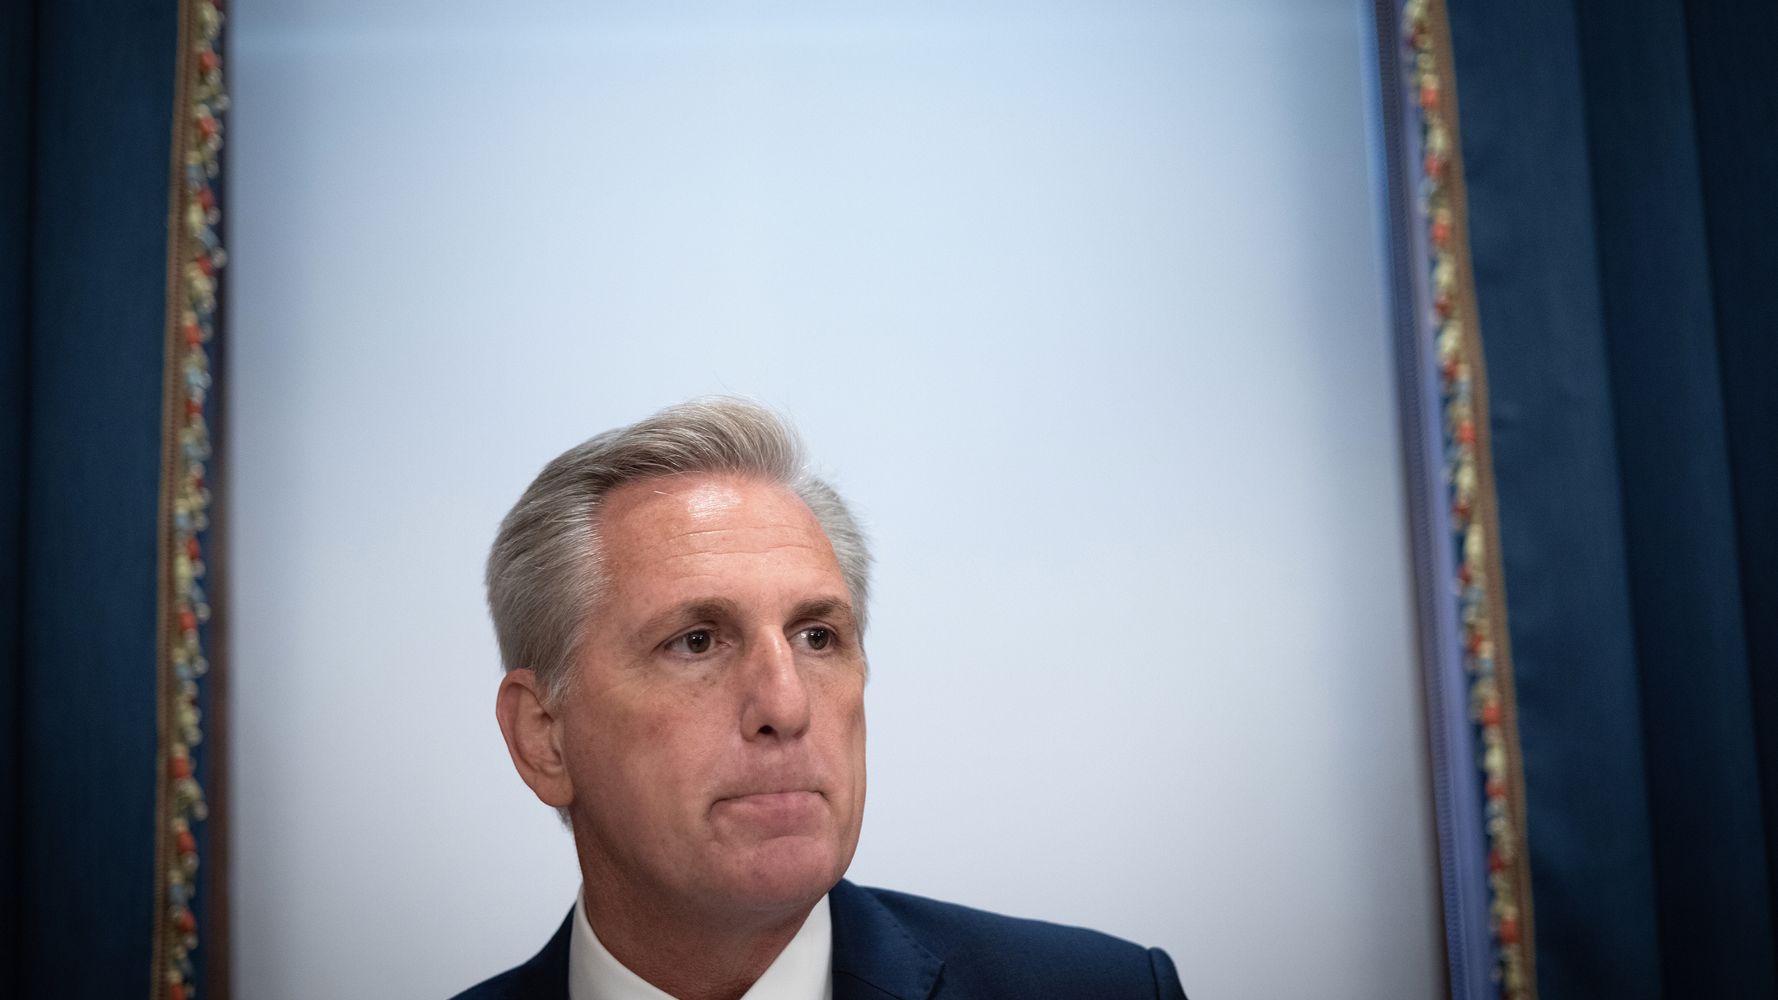 Kevin McCarthy Condemns Marjorie Taylor Greene's Holocaust, Mask Comparison